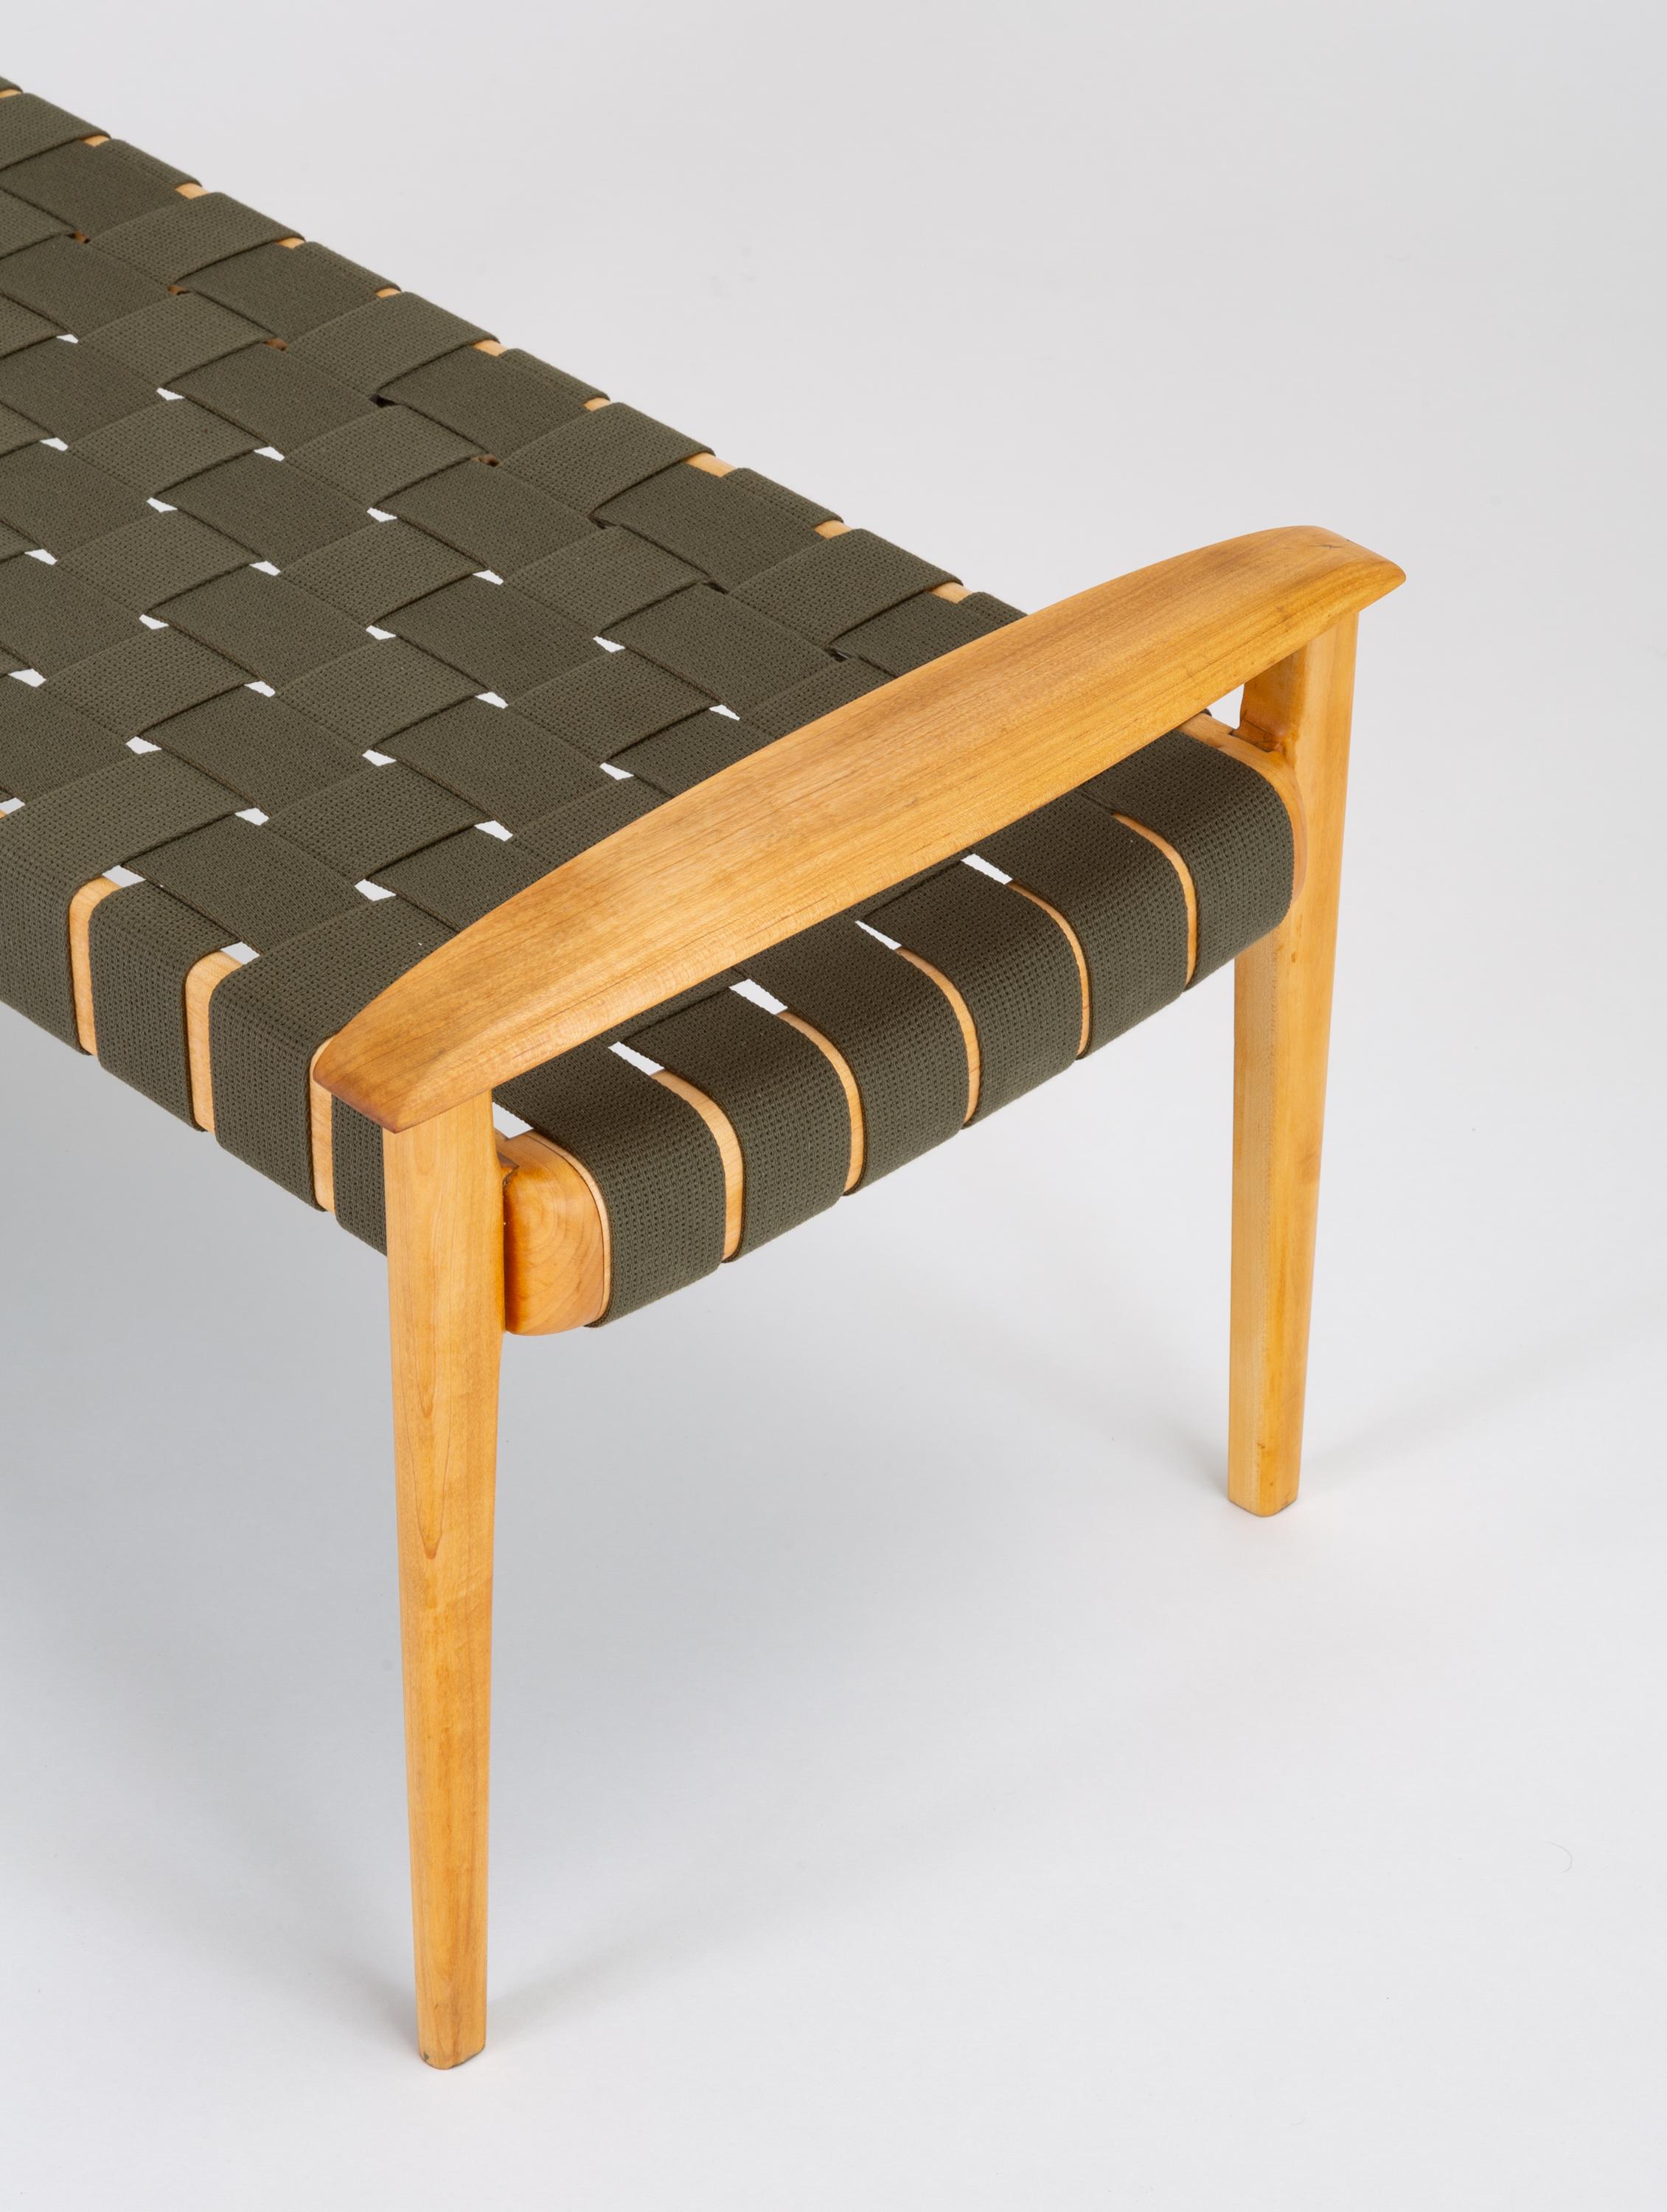 American-Made Maple Bench with Woven Seat by Tom Ghilarducci 5